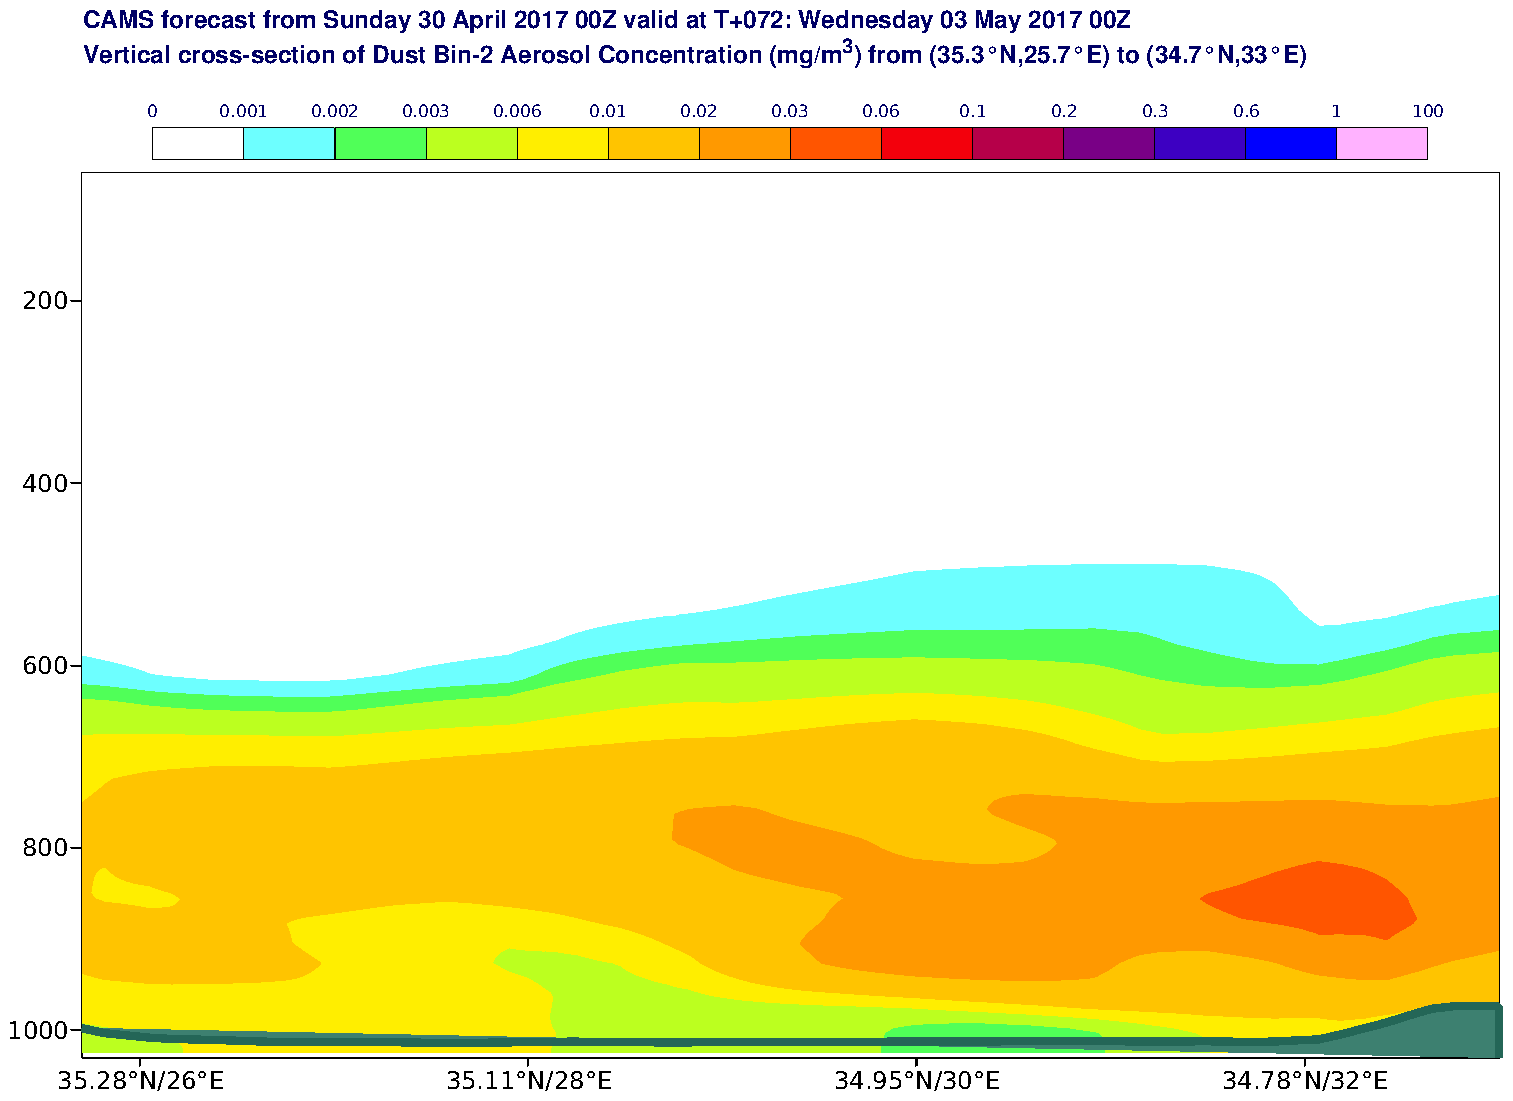 Vertical cross-section of Dust Bin-2 Aerosol Concentration (mg/m3) valid at T72 - 2017-05-03 00:00